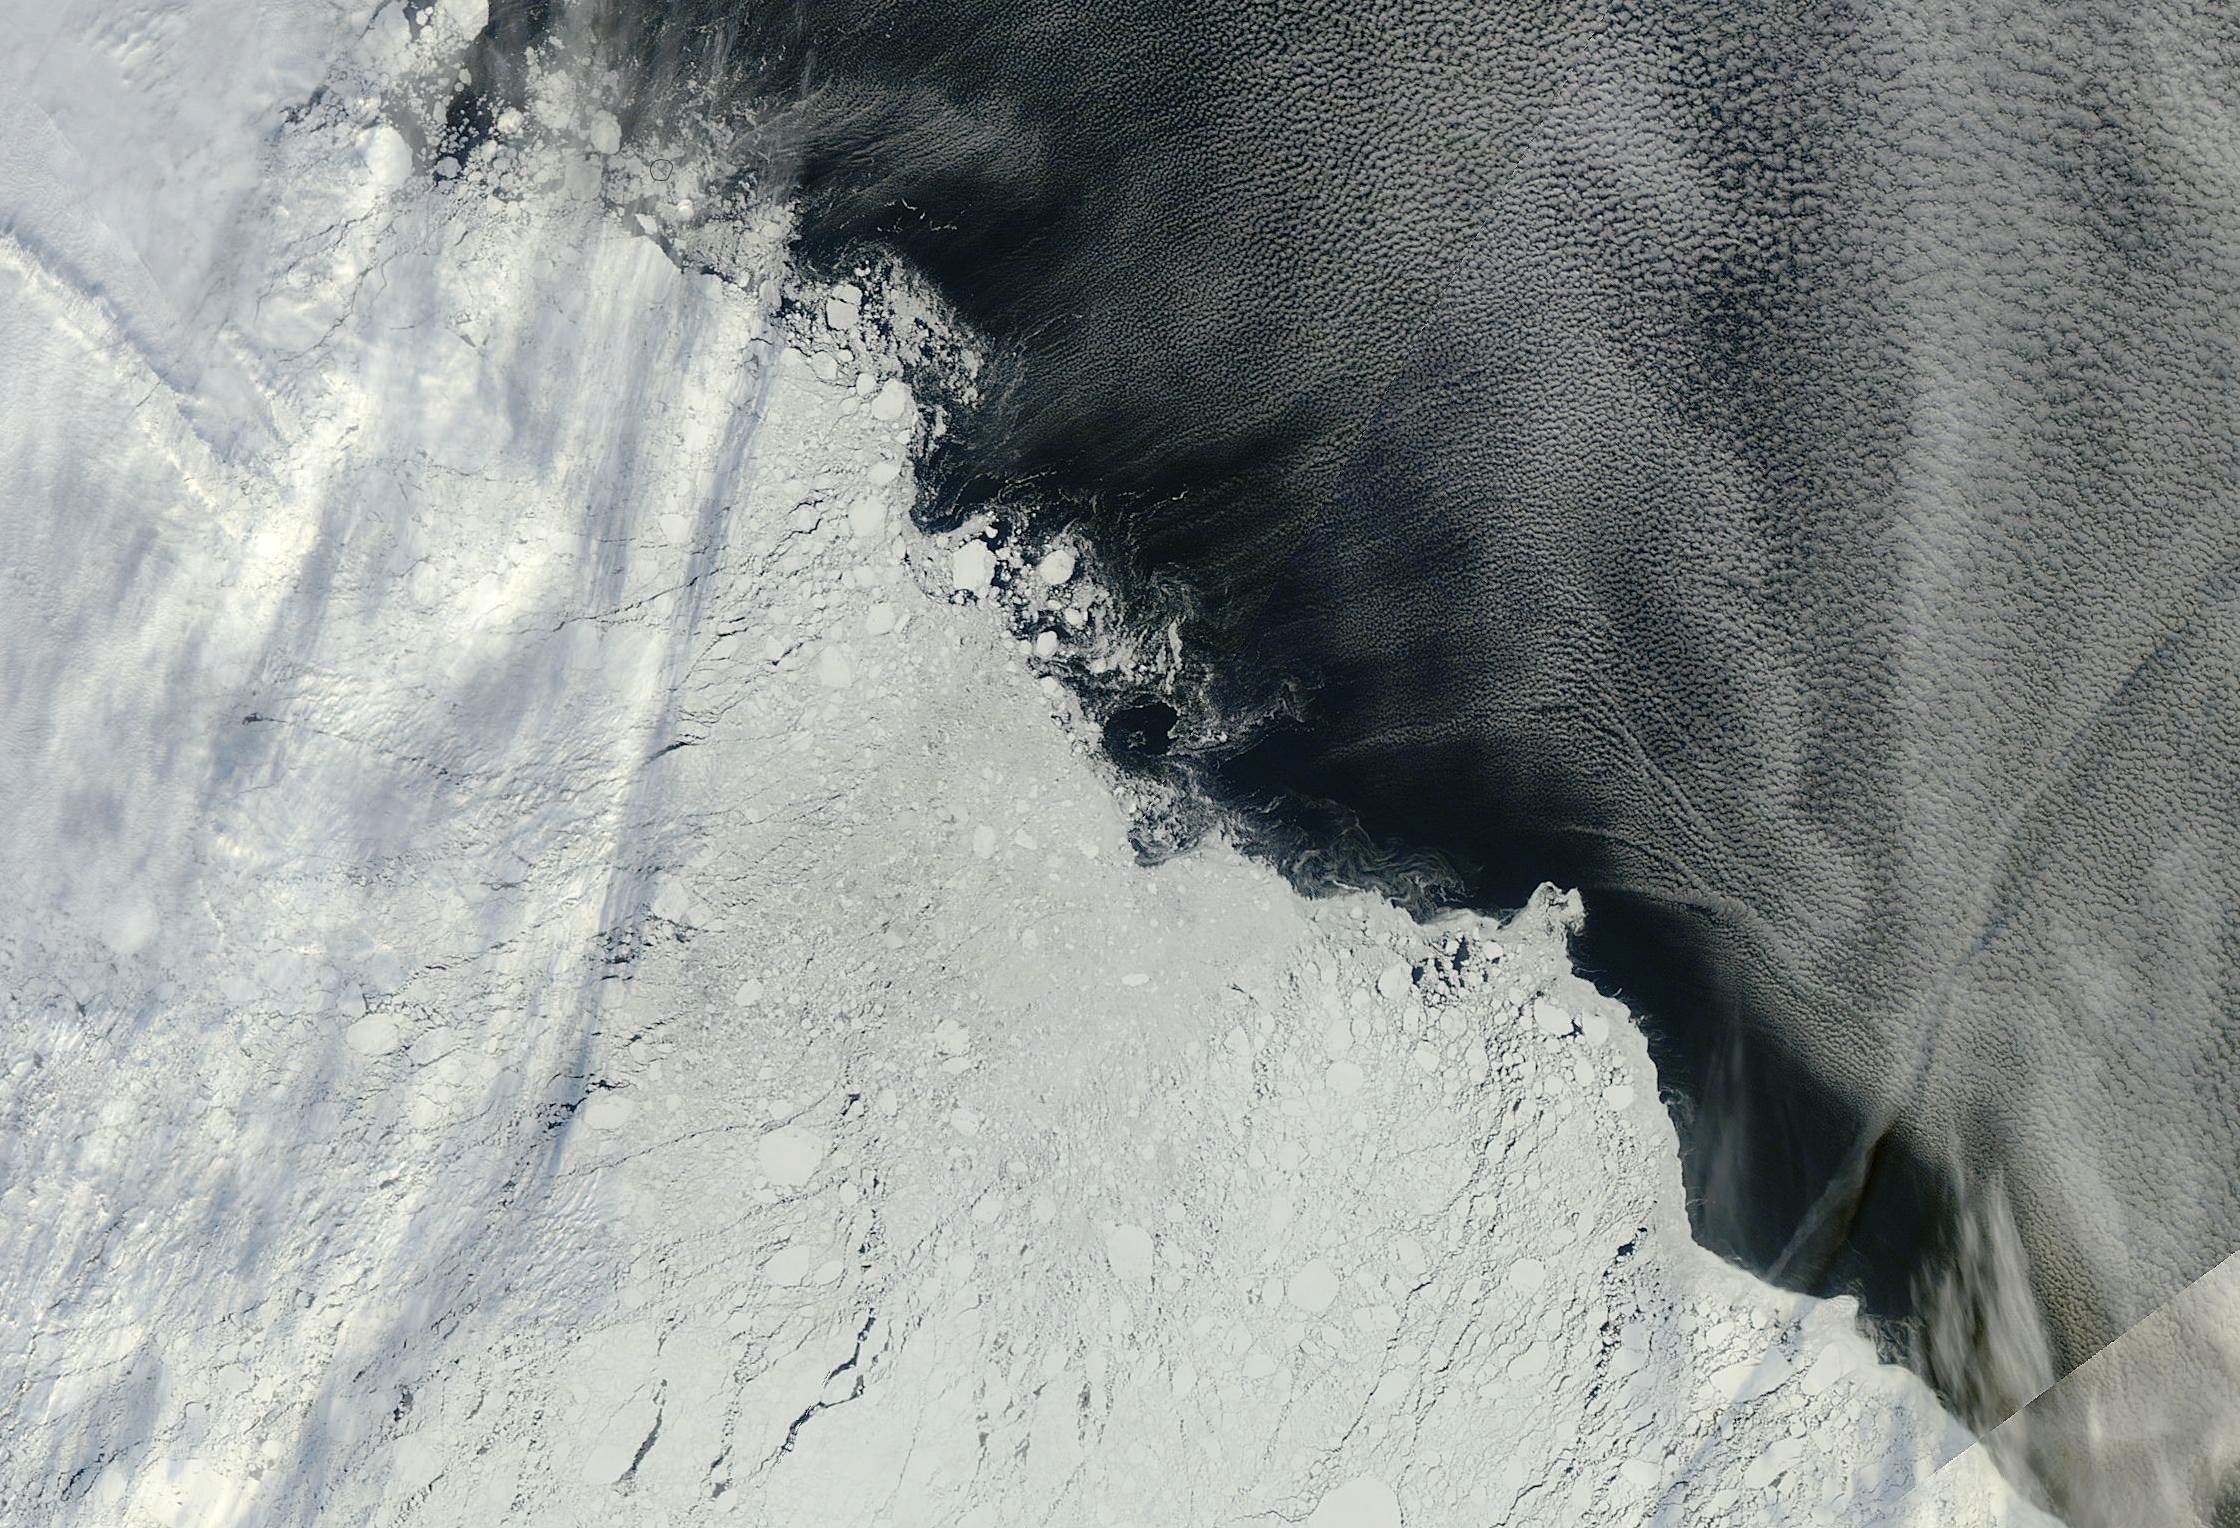 An area of the Arctic sea ice pack roughly northeast of the New Siberian Islands, captured by multiple orbits of the MODIS instrument on NASA's Terra satellite on Sept. 13, 2013. Sea ice dominates the lower left half of the image; open ocean and cloud formations can be seen in the upper right. <i><b>Image Credit: Image courtesy NASA Worldview</b></i>